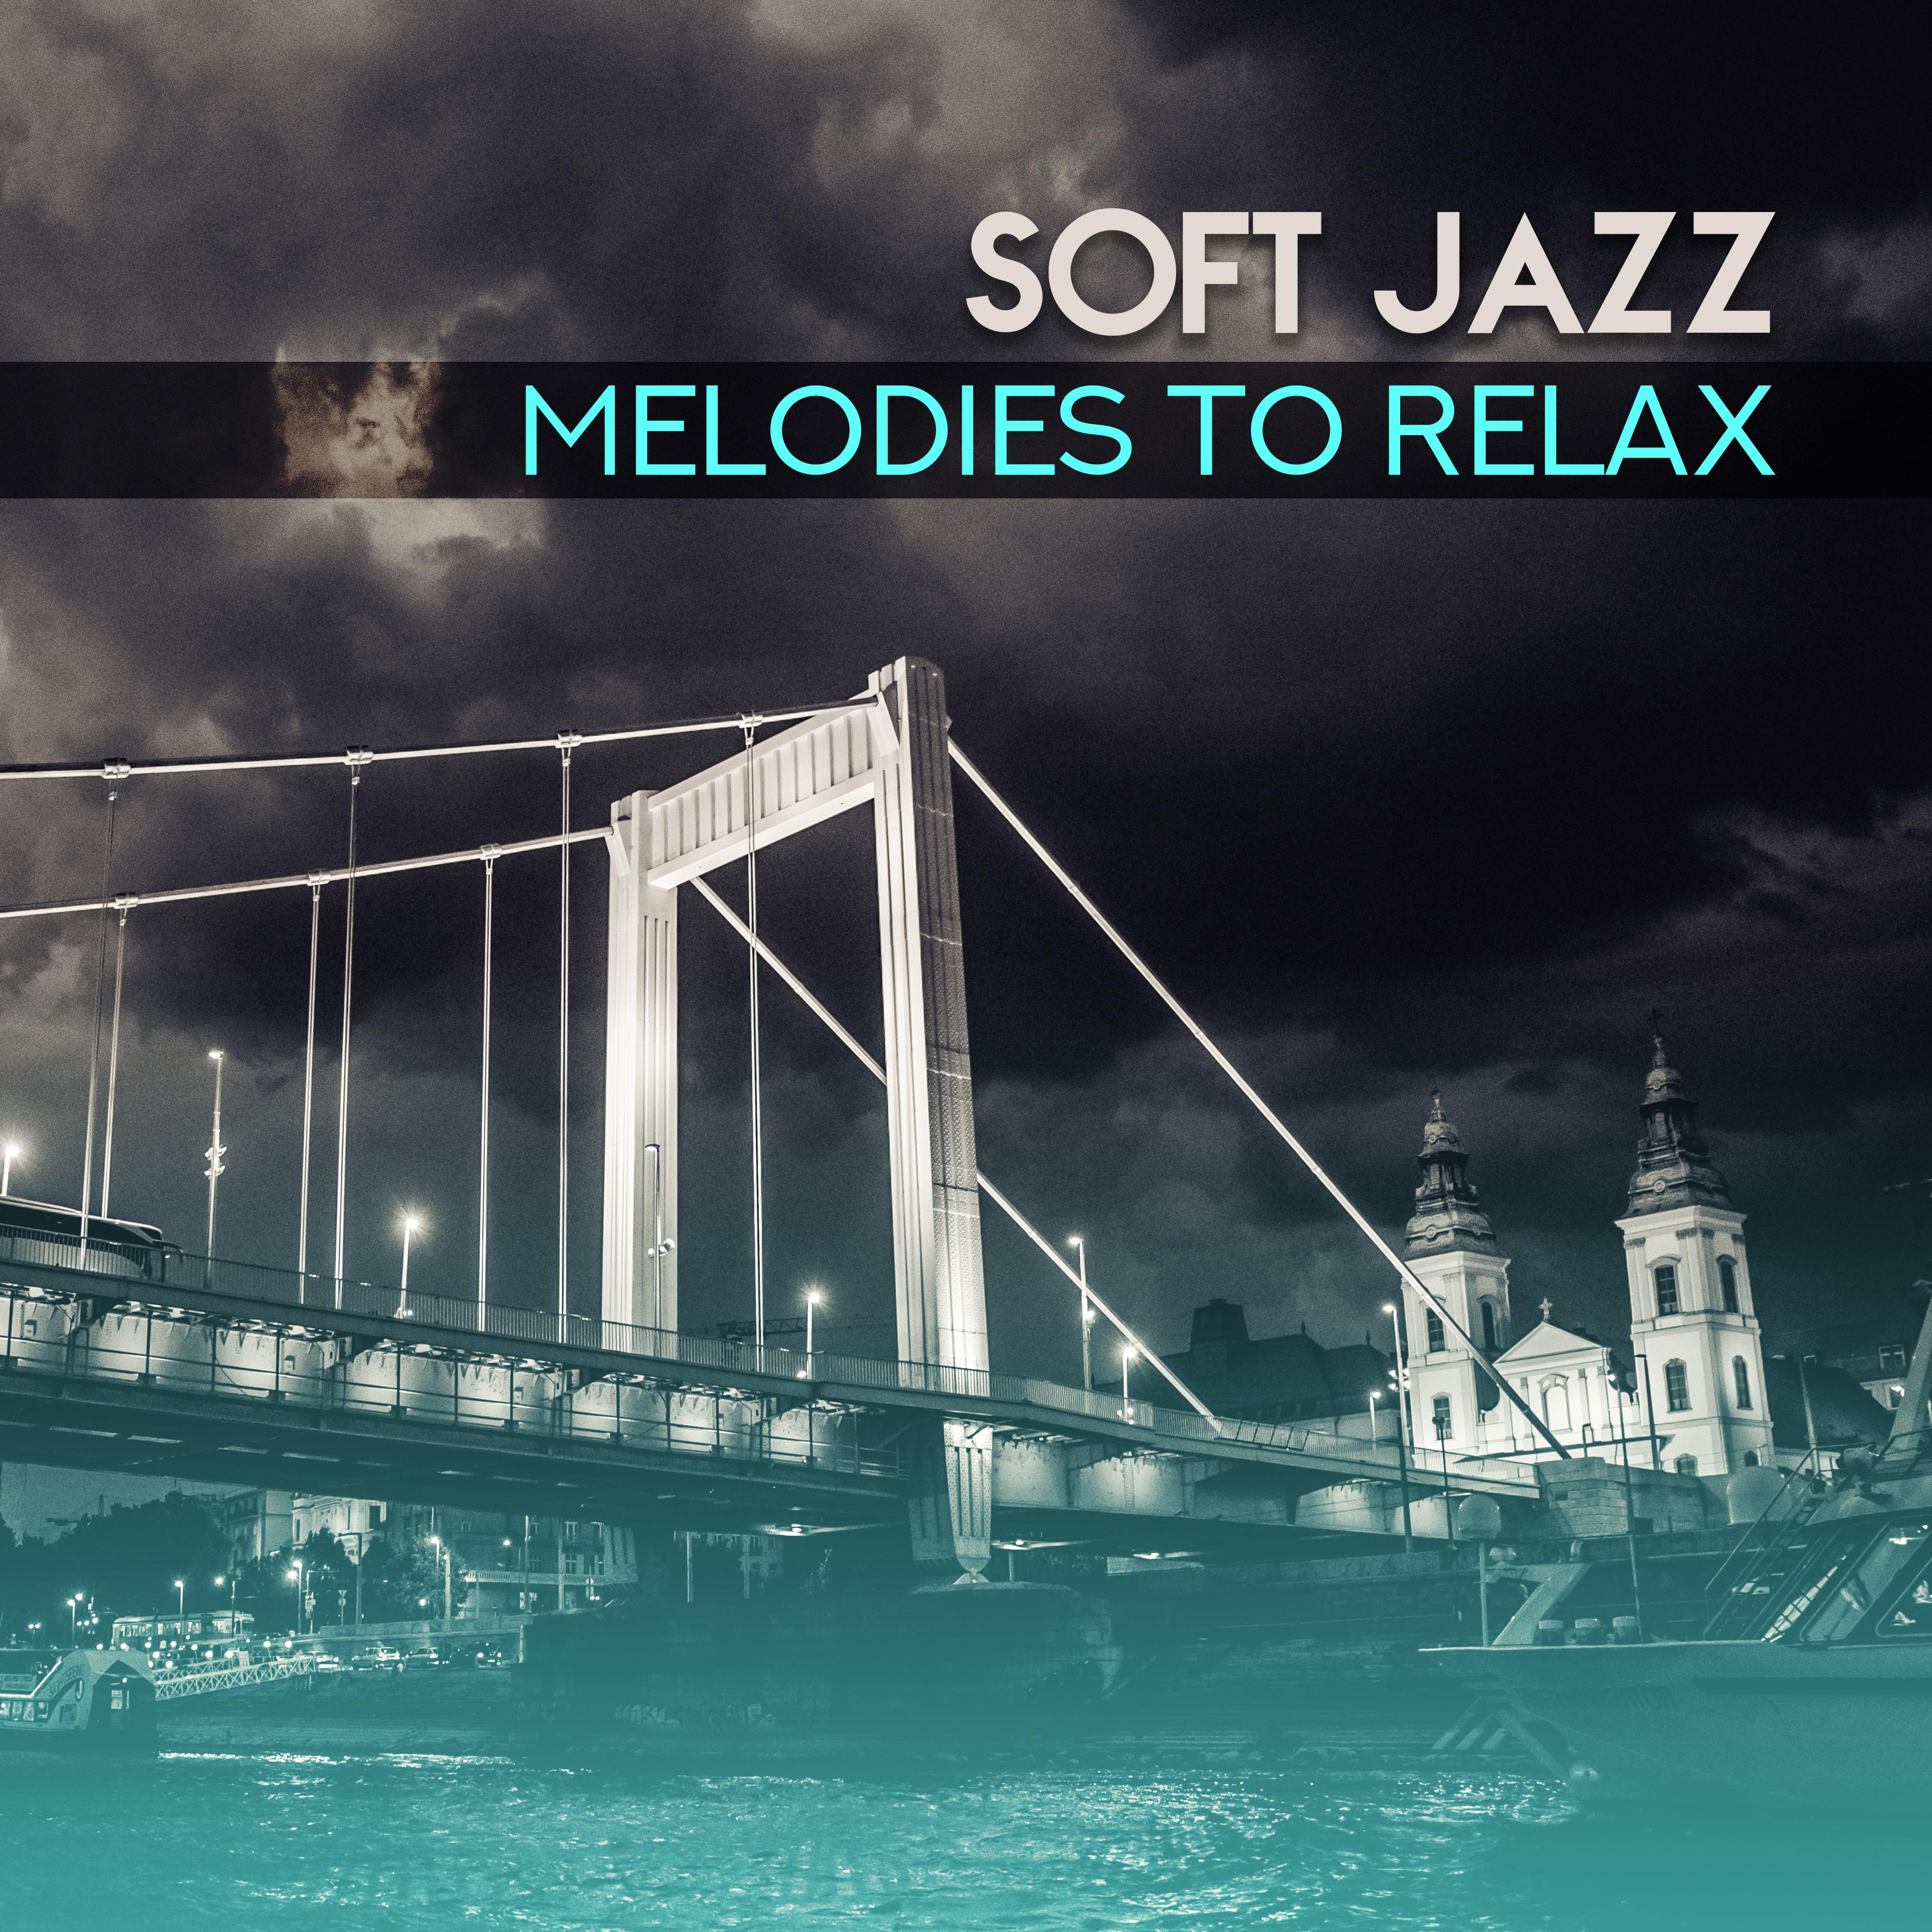 Soft Jazz Melodies to Relax  Calm Mind  Body with Jazz Sounds, Music to Rest, Easy Listening, Peaceful Melodies